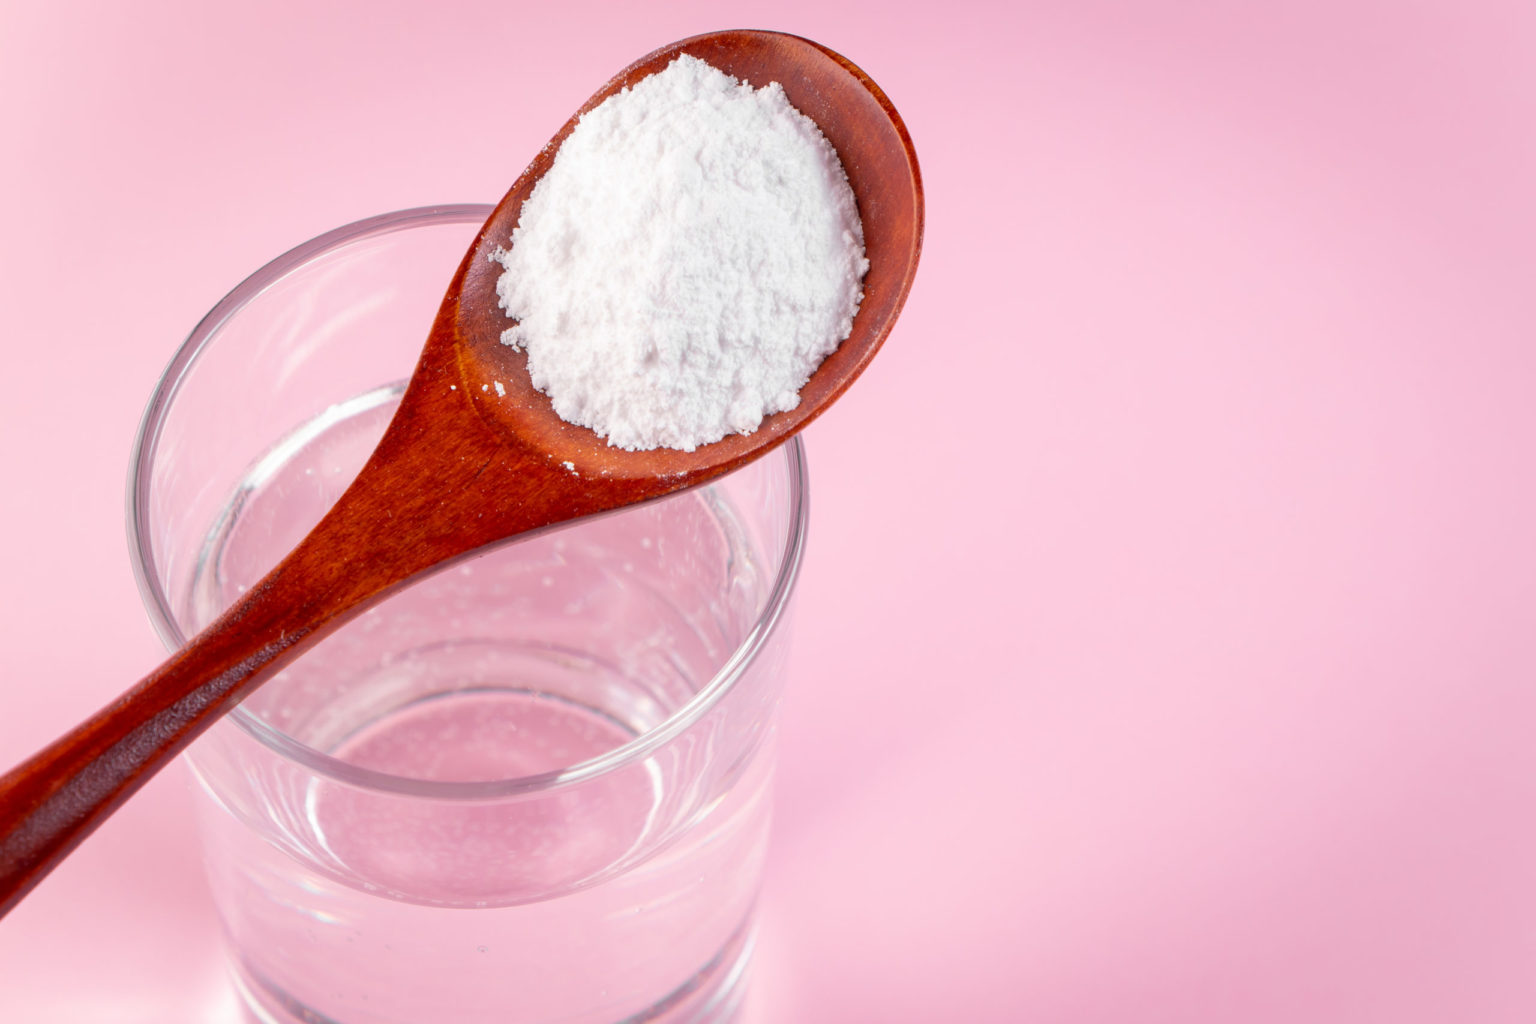 Natural bio supplement collagen powder in wooden spoon and glass of pure water on pink background.